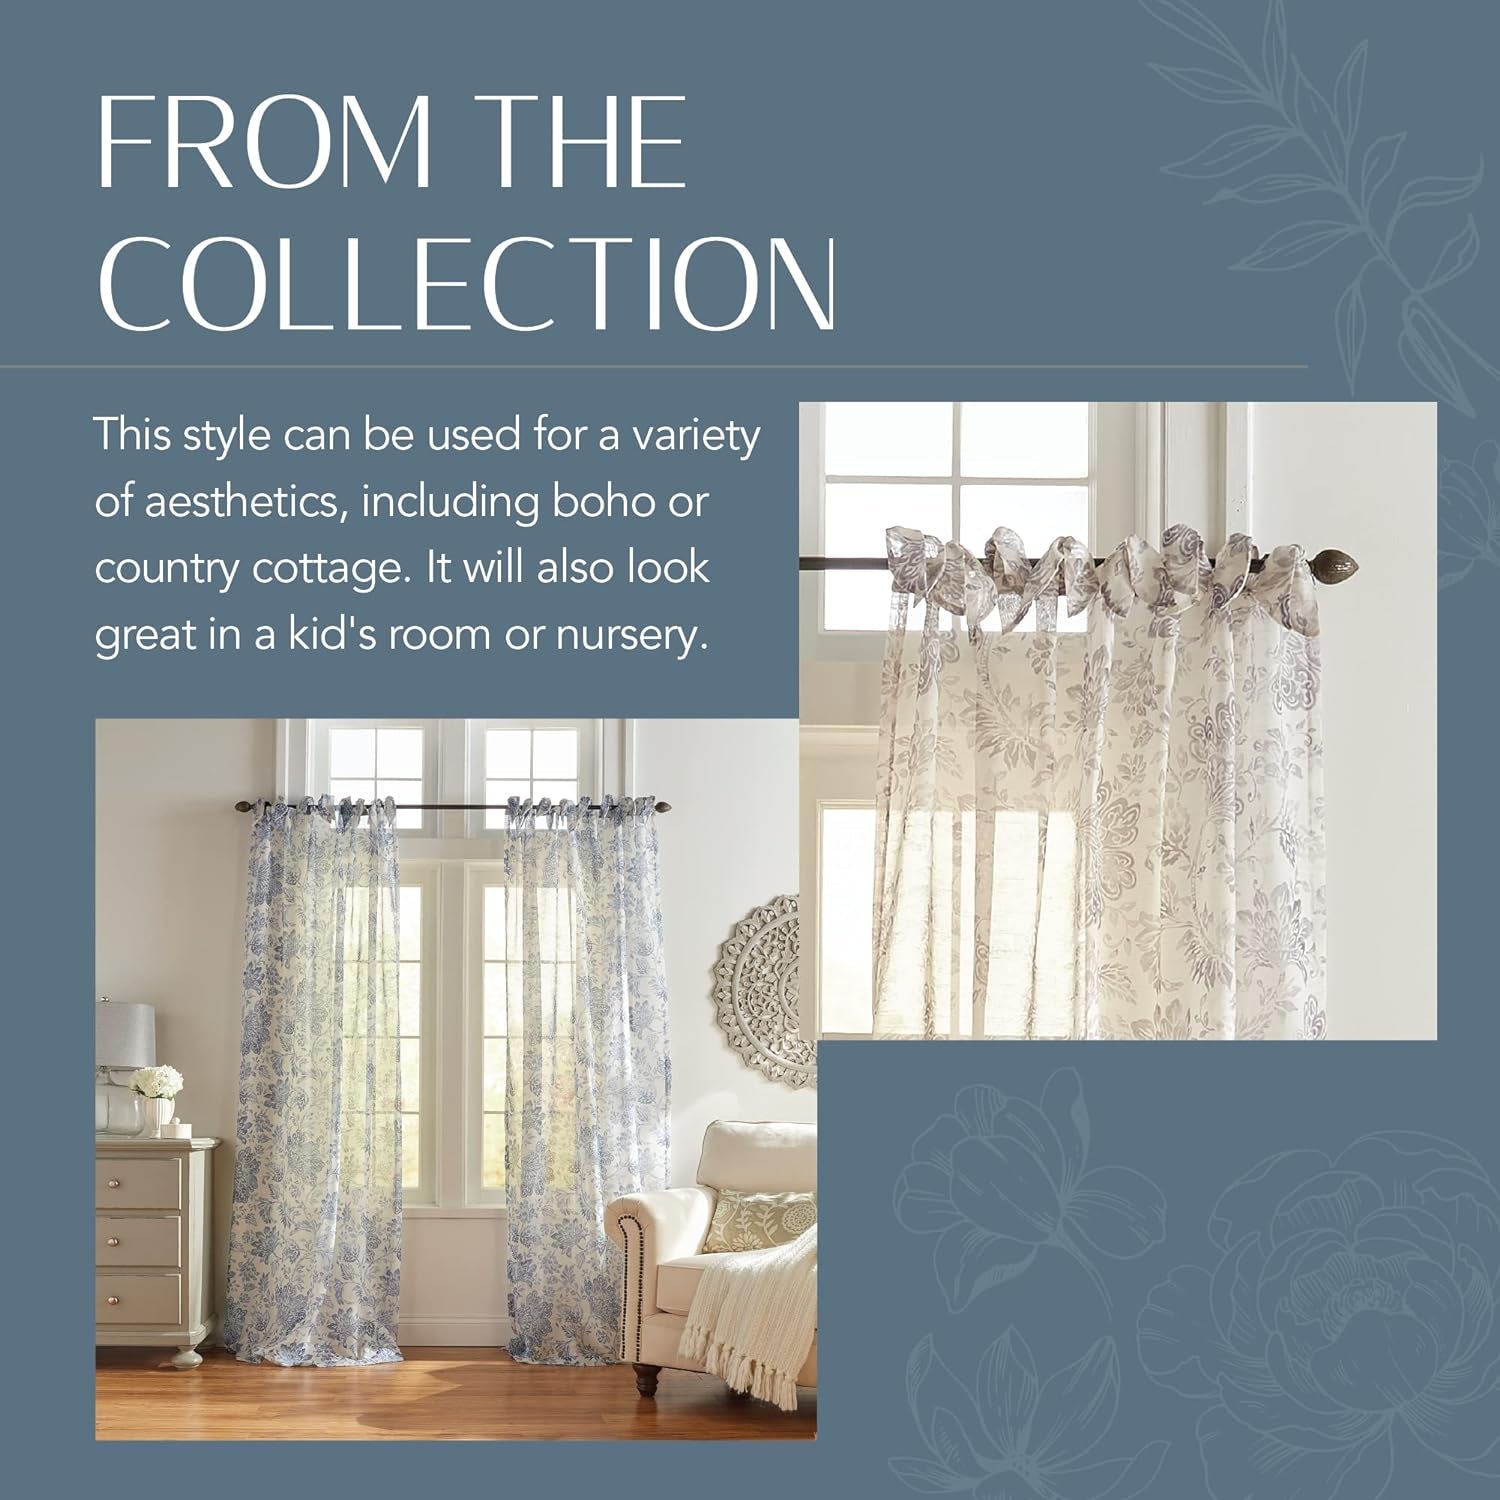 Elrene Home Fashions Fashions Westport Floral Tie-Top Sheer Window Curtain, 95.00" X 52.00", Flax  Elrene Home Fashions   